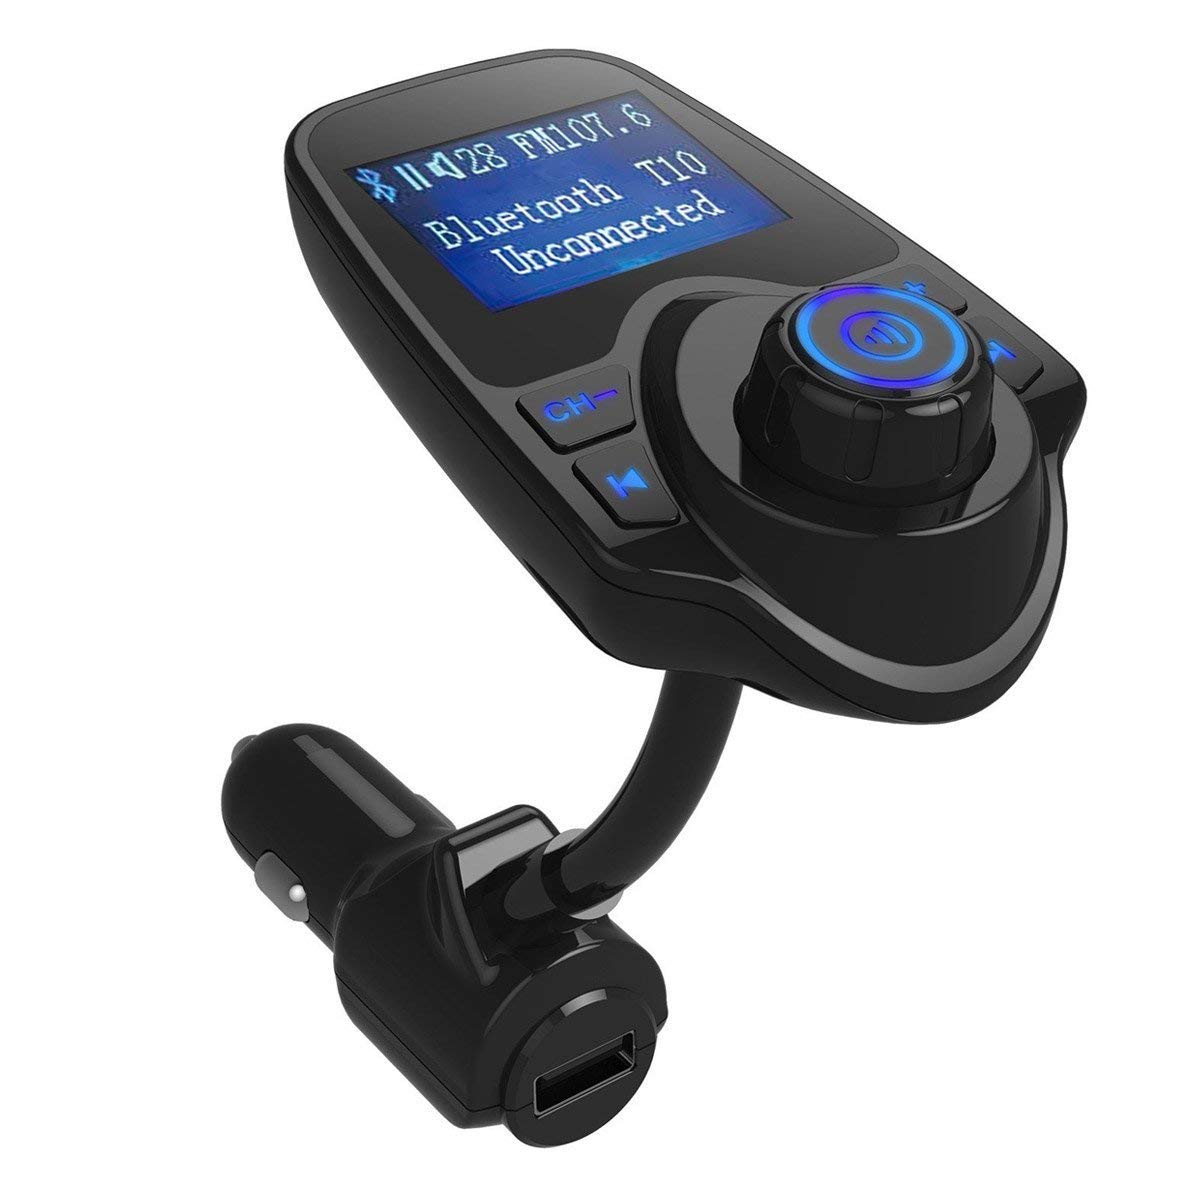 Car Bluetooth smitter Radio Adapter with Hands-Free Calling/Music Control/USB Charging Port/SD Card Support